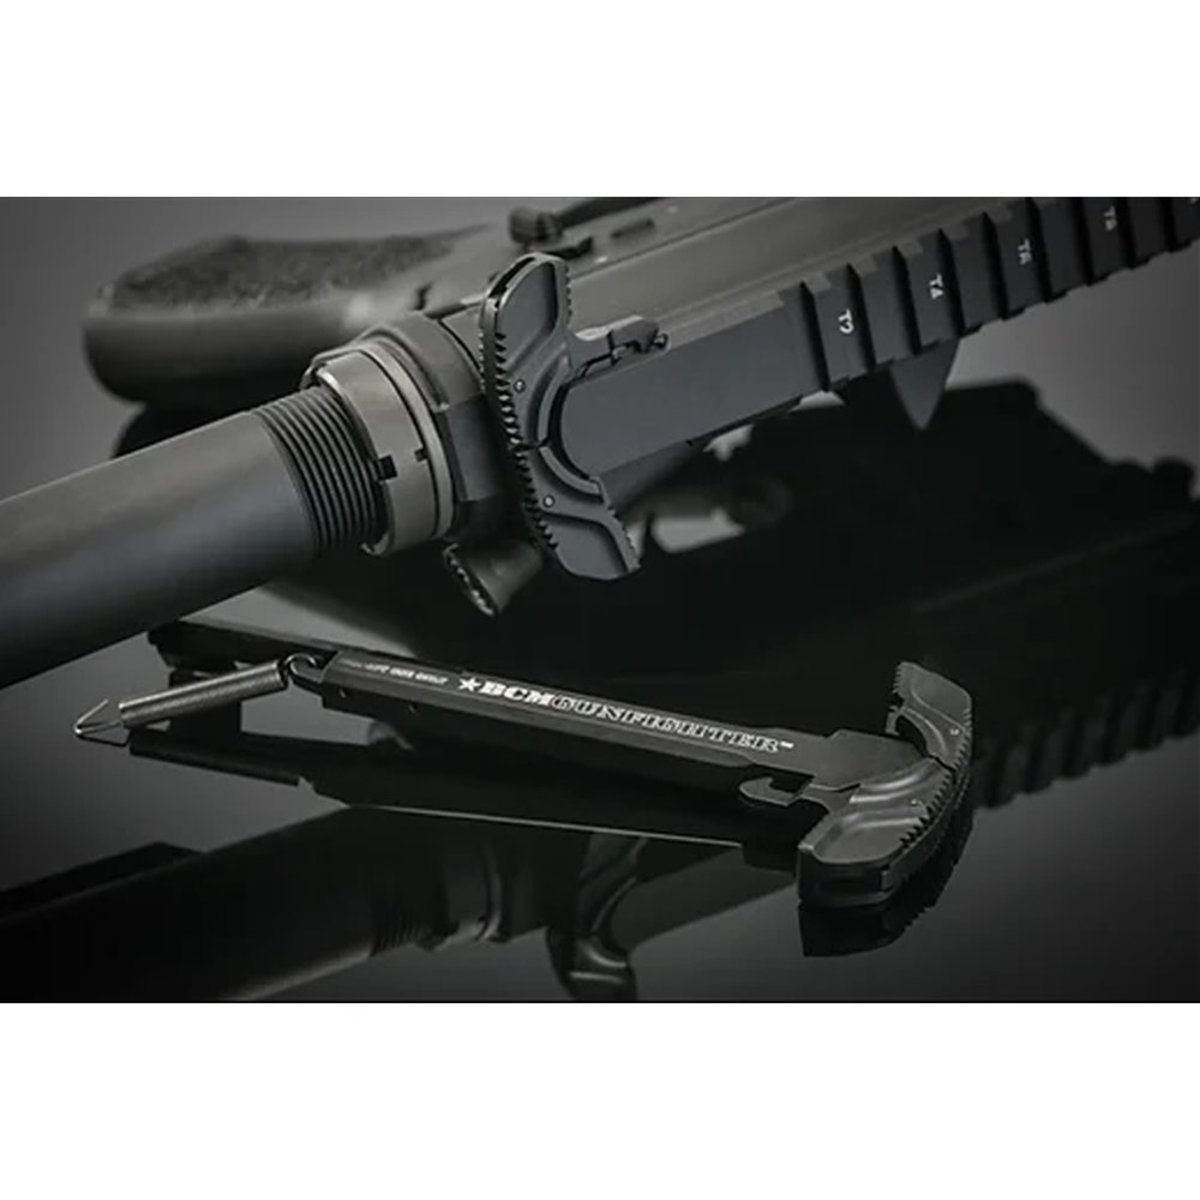 BCM MCMR GUNFIGHTER AEG 11.5" Deluxe Edition